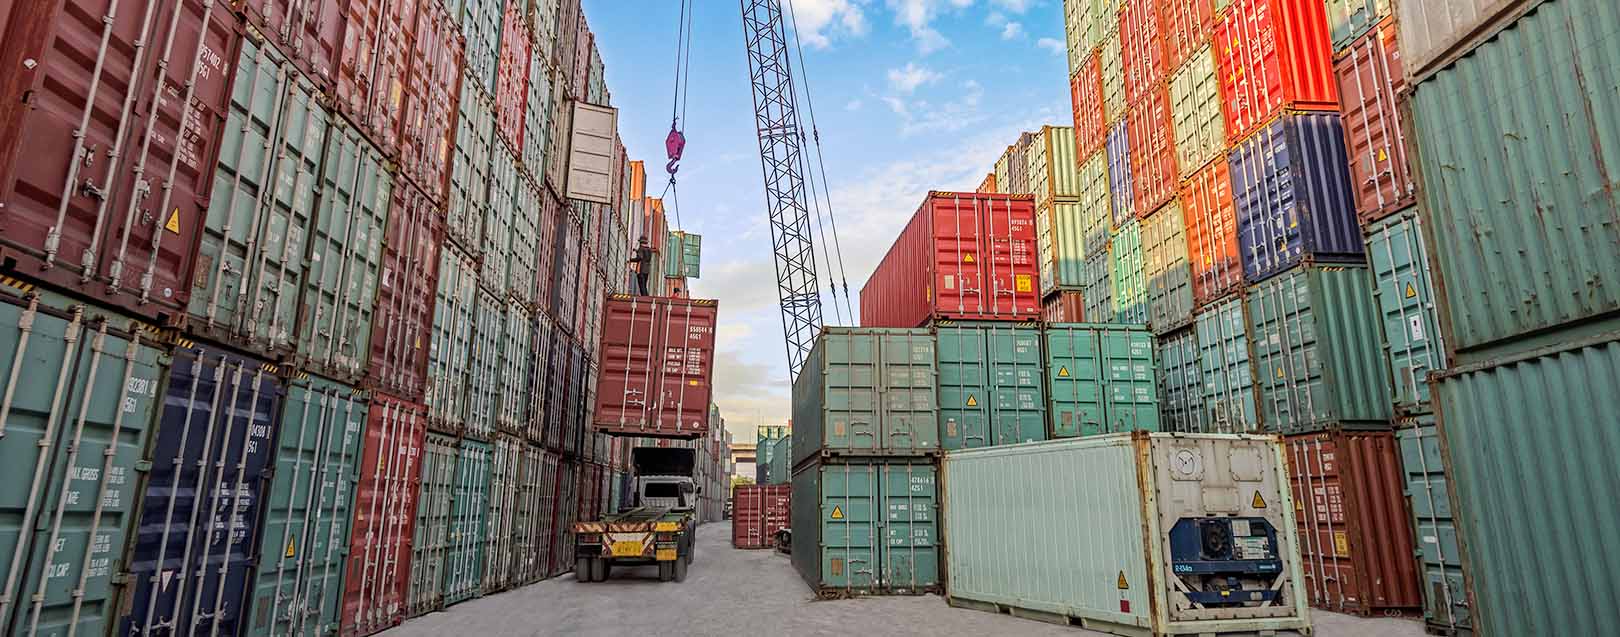 Govt working on single-window clearance to ease trade